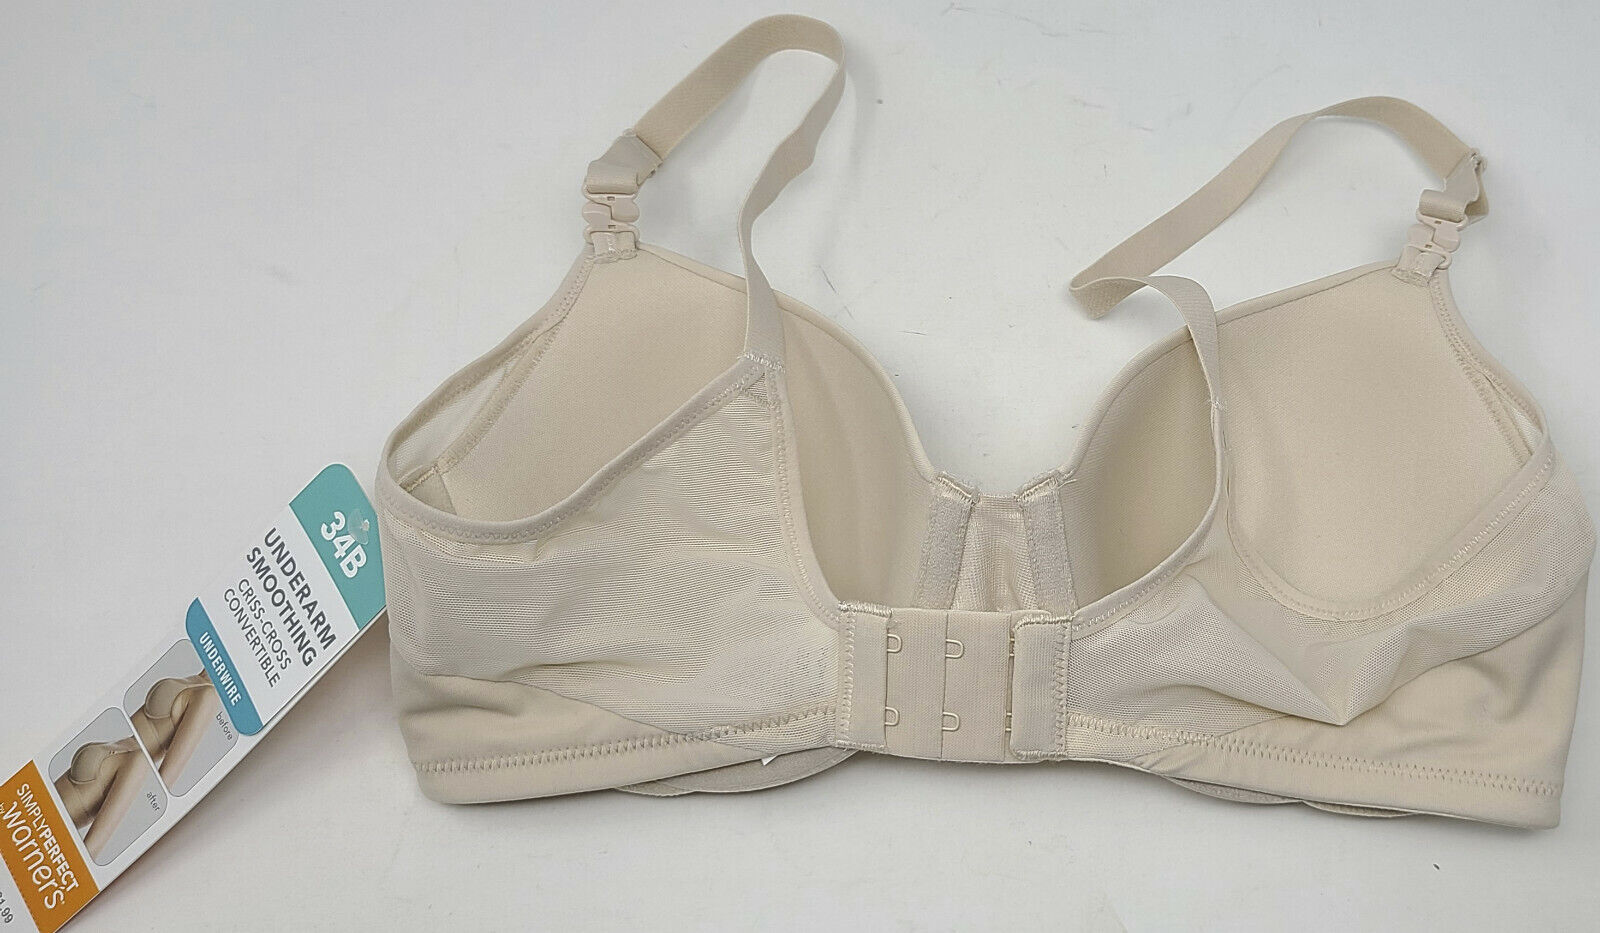 Simply Perfect by Warner's Women Underarm Smoothing Underwire Bra